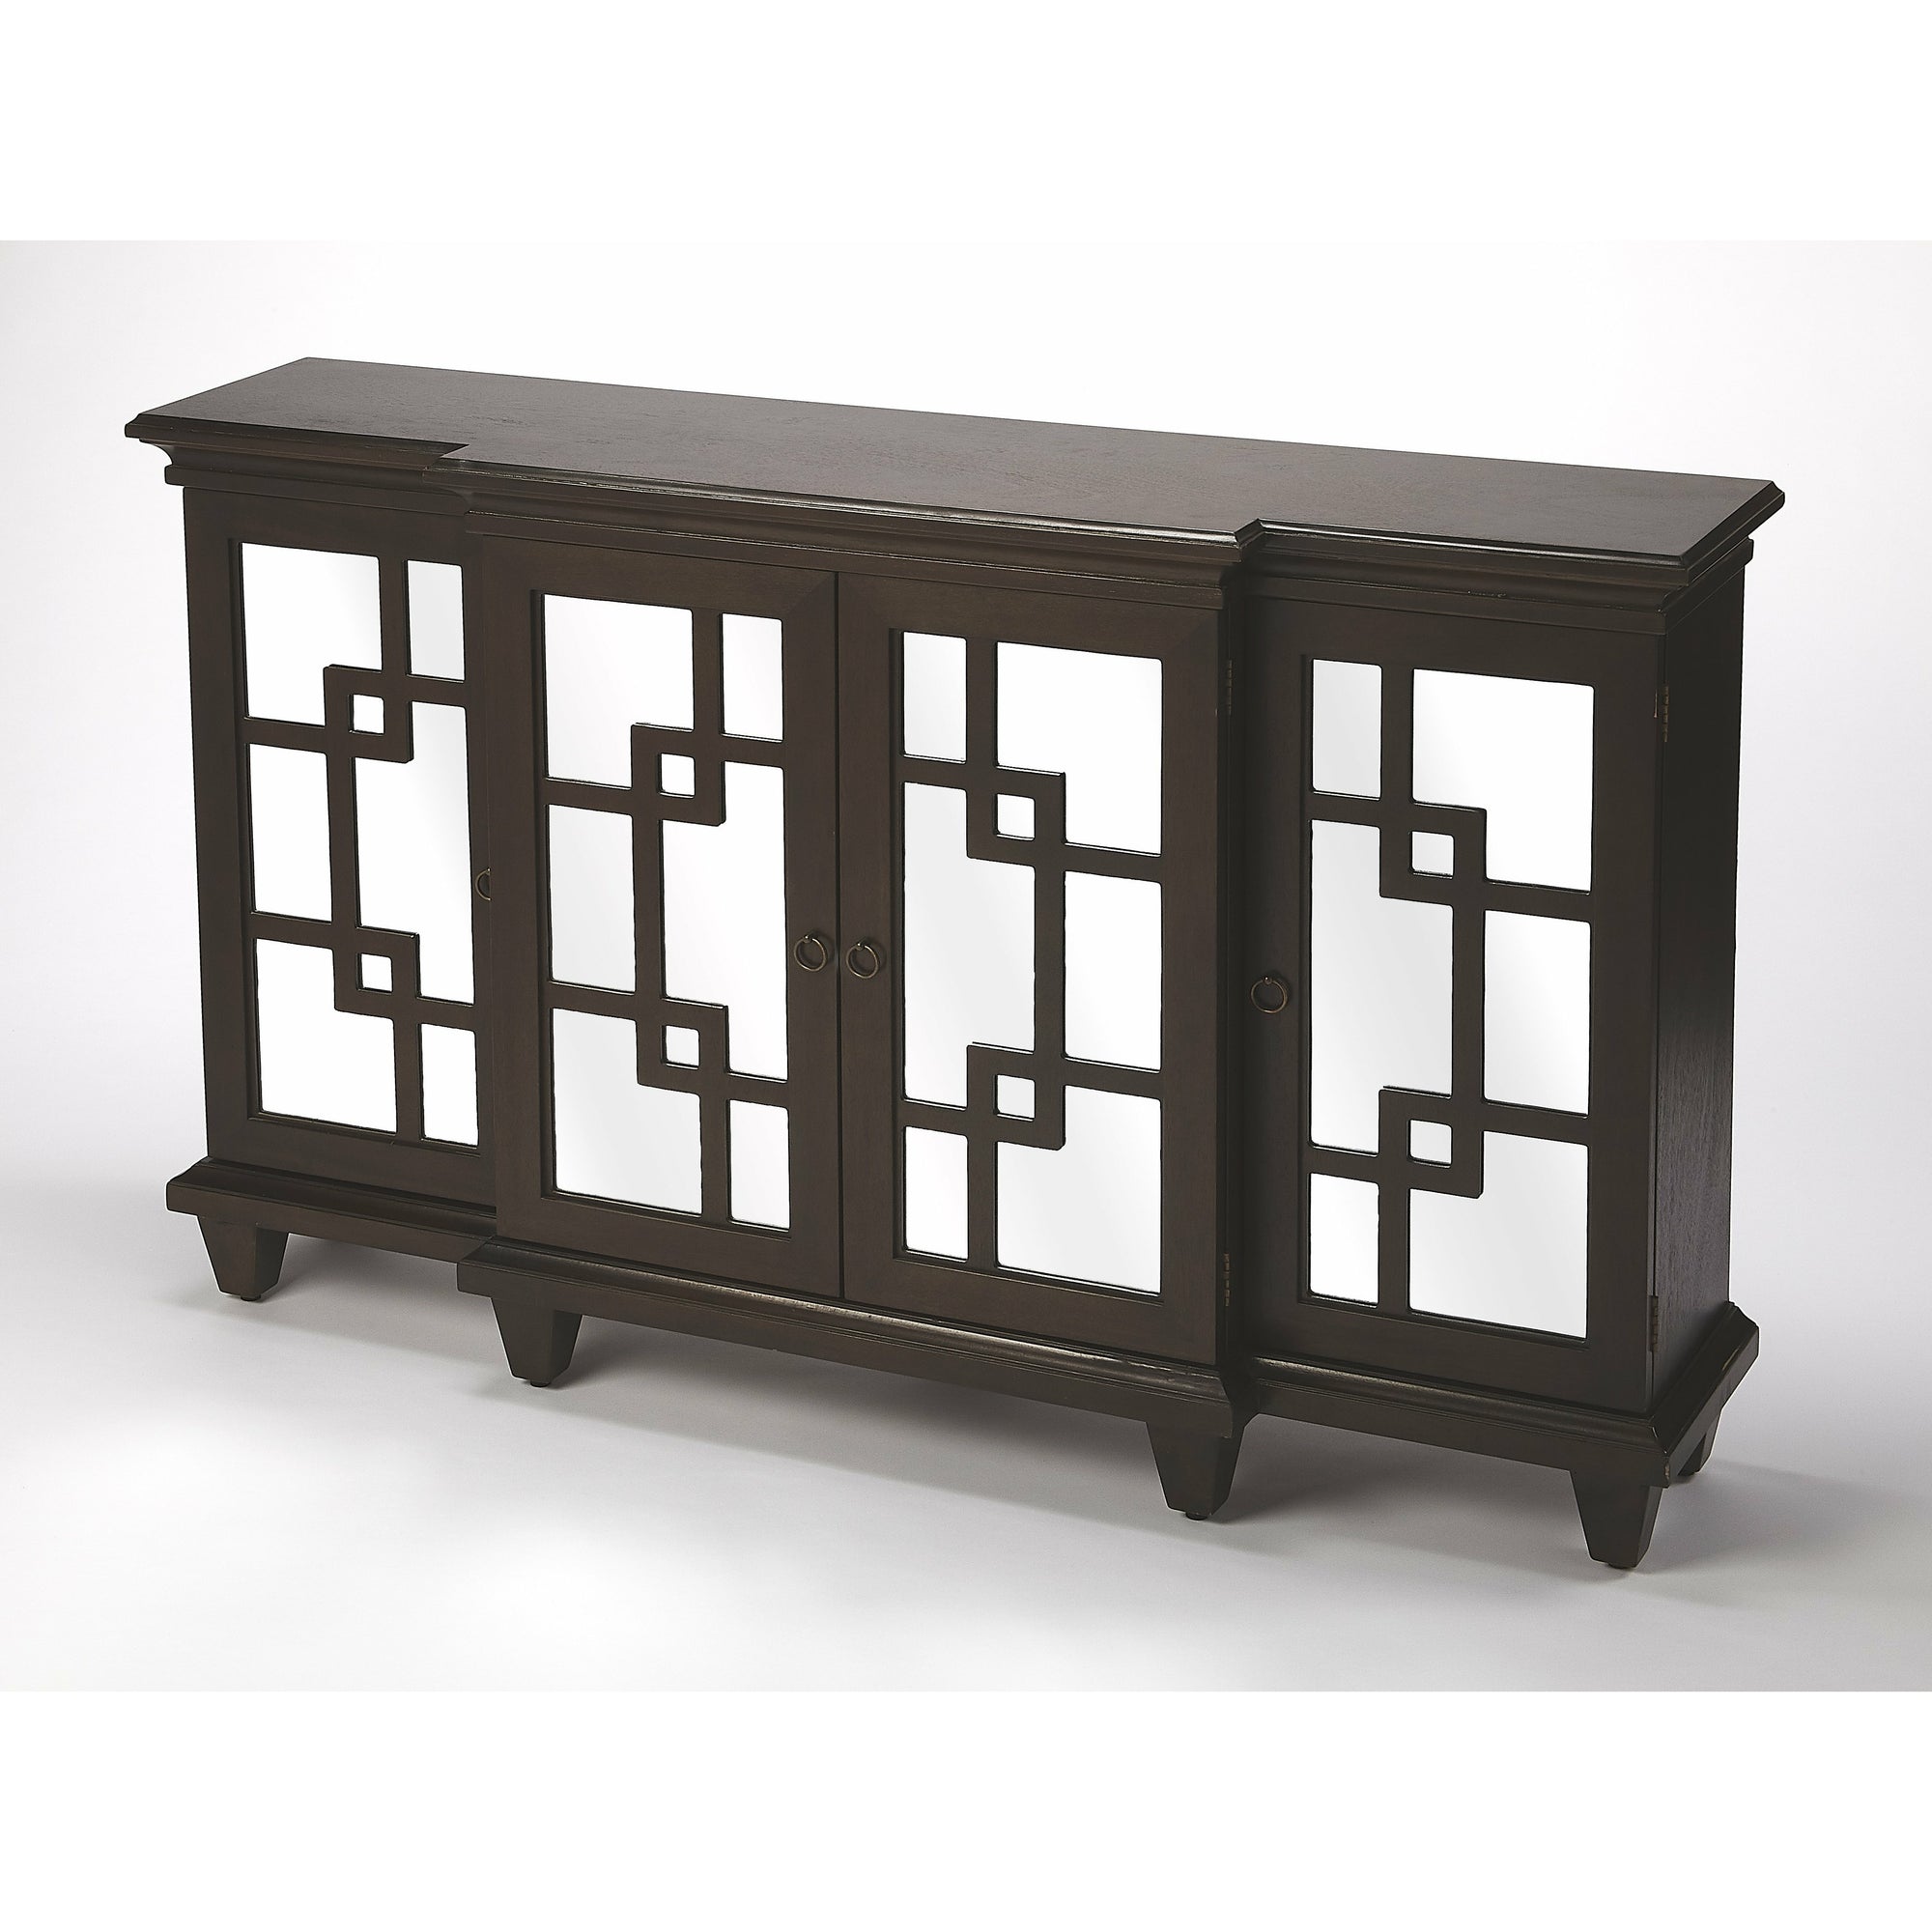 Butler Specialty Geometric Contemporary Pattern Transitional Rectangular Coffee Dark Brown Sideboard Chests/Cabinets Butler Specialty 